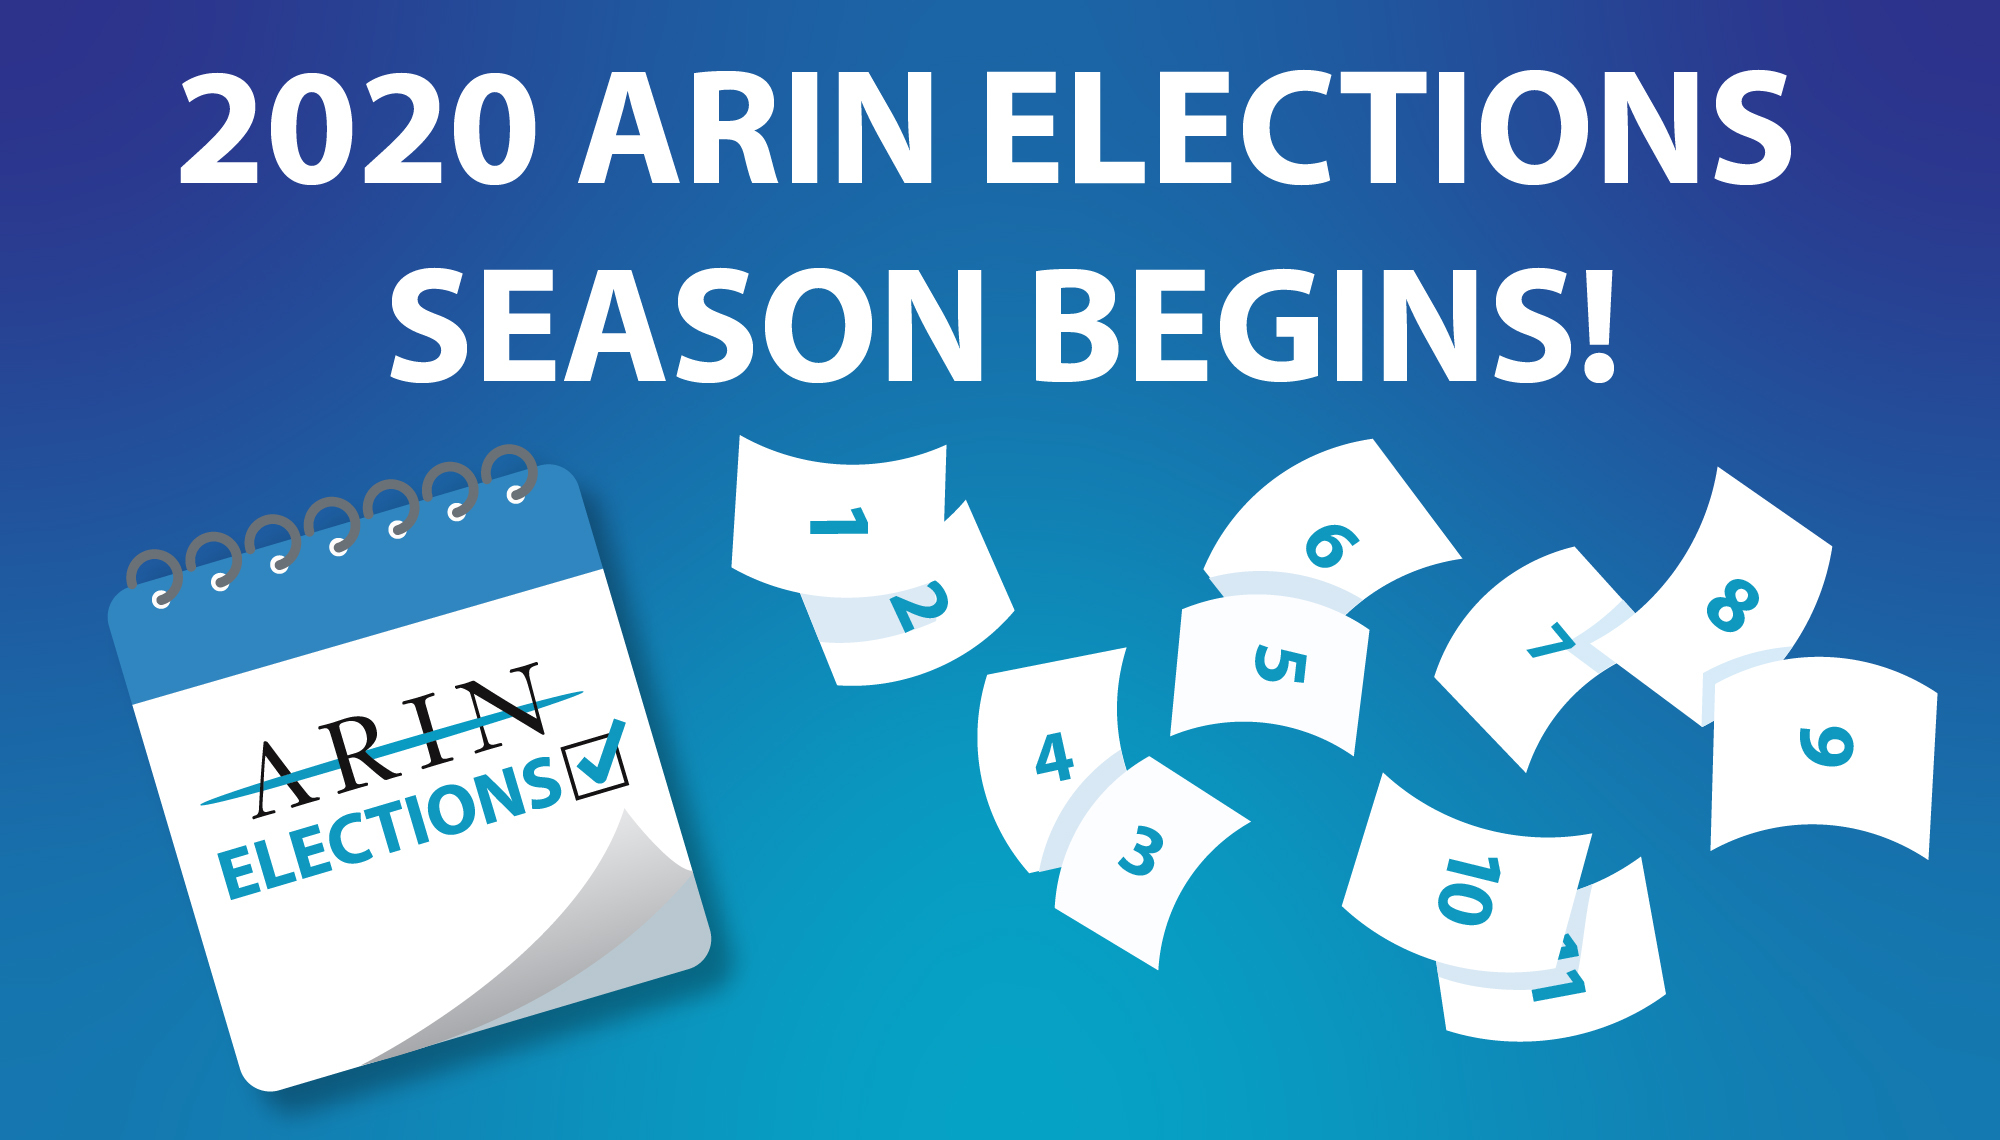 Save the Dates: 2020 ARIN Elections Season Begins!